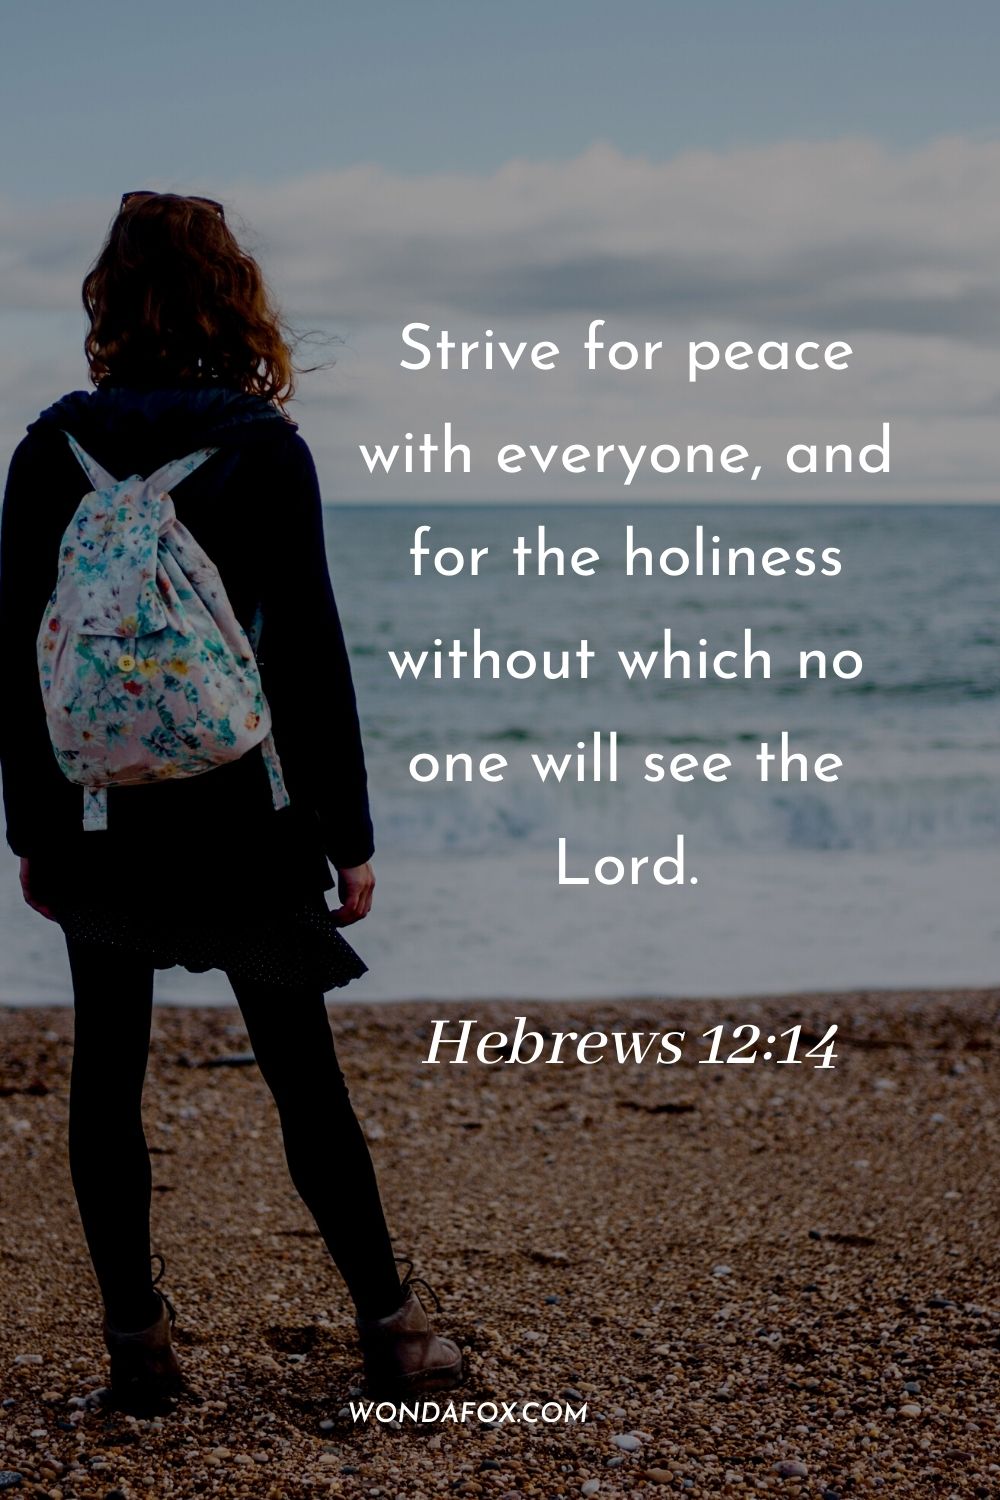 Strive for peace with everyone, and for the holiness without which no one will see the Lord. Hebrews 12:14